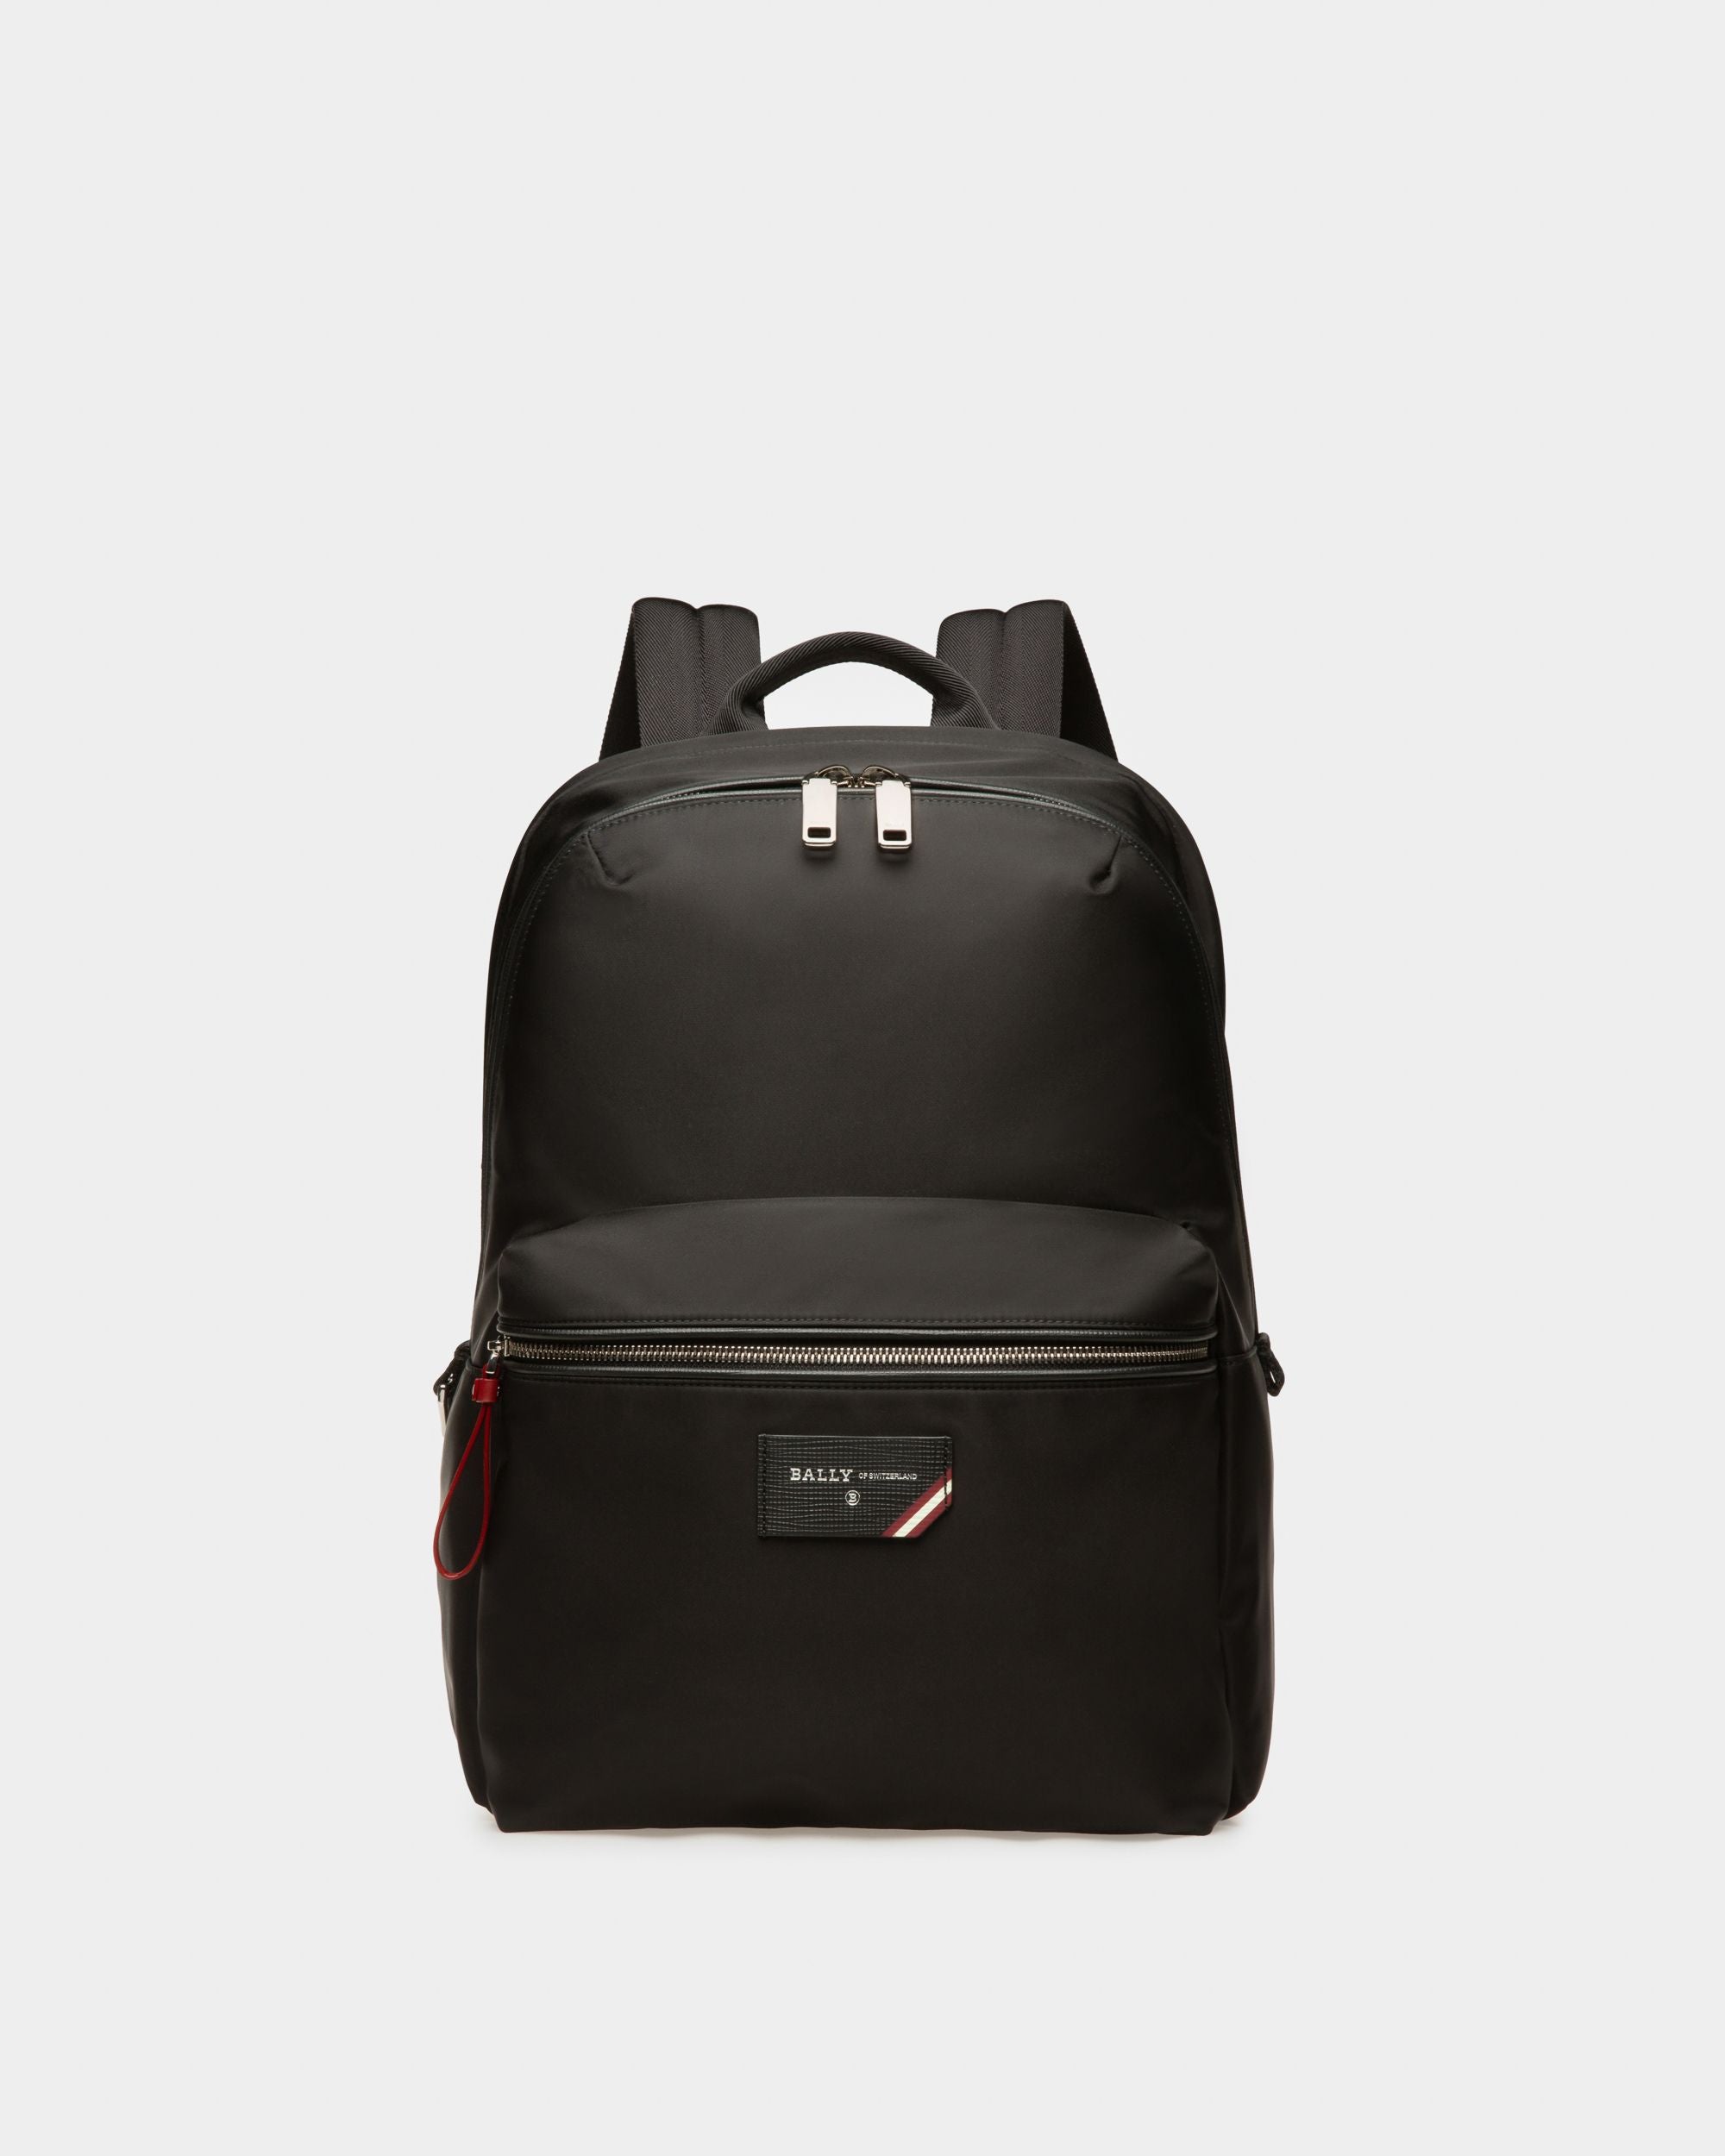 Ferey | Men's Backpack | Black Leather And Nylon | Bally | Still Life Front